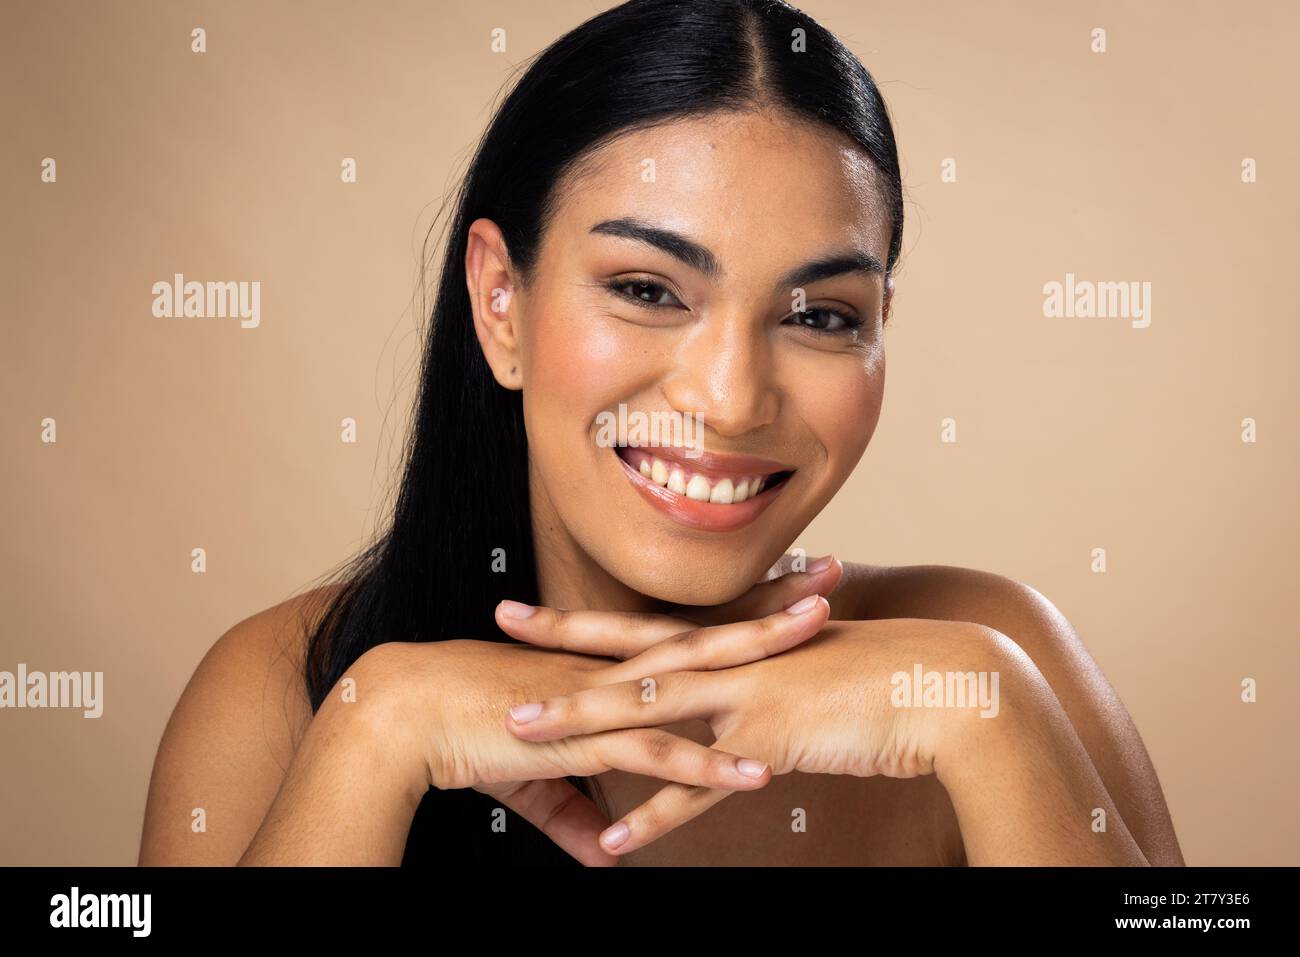 Smiling biracial woman with dark hair, hands under chin, natural make up on brown background Stock Photo